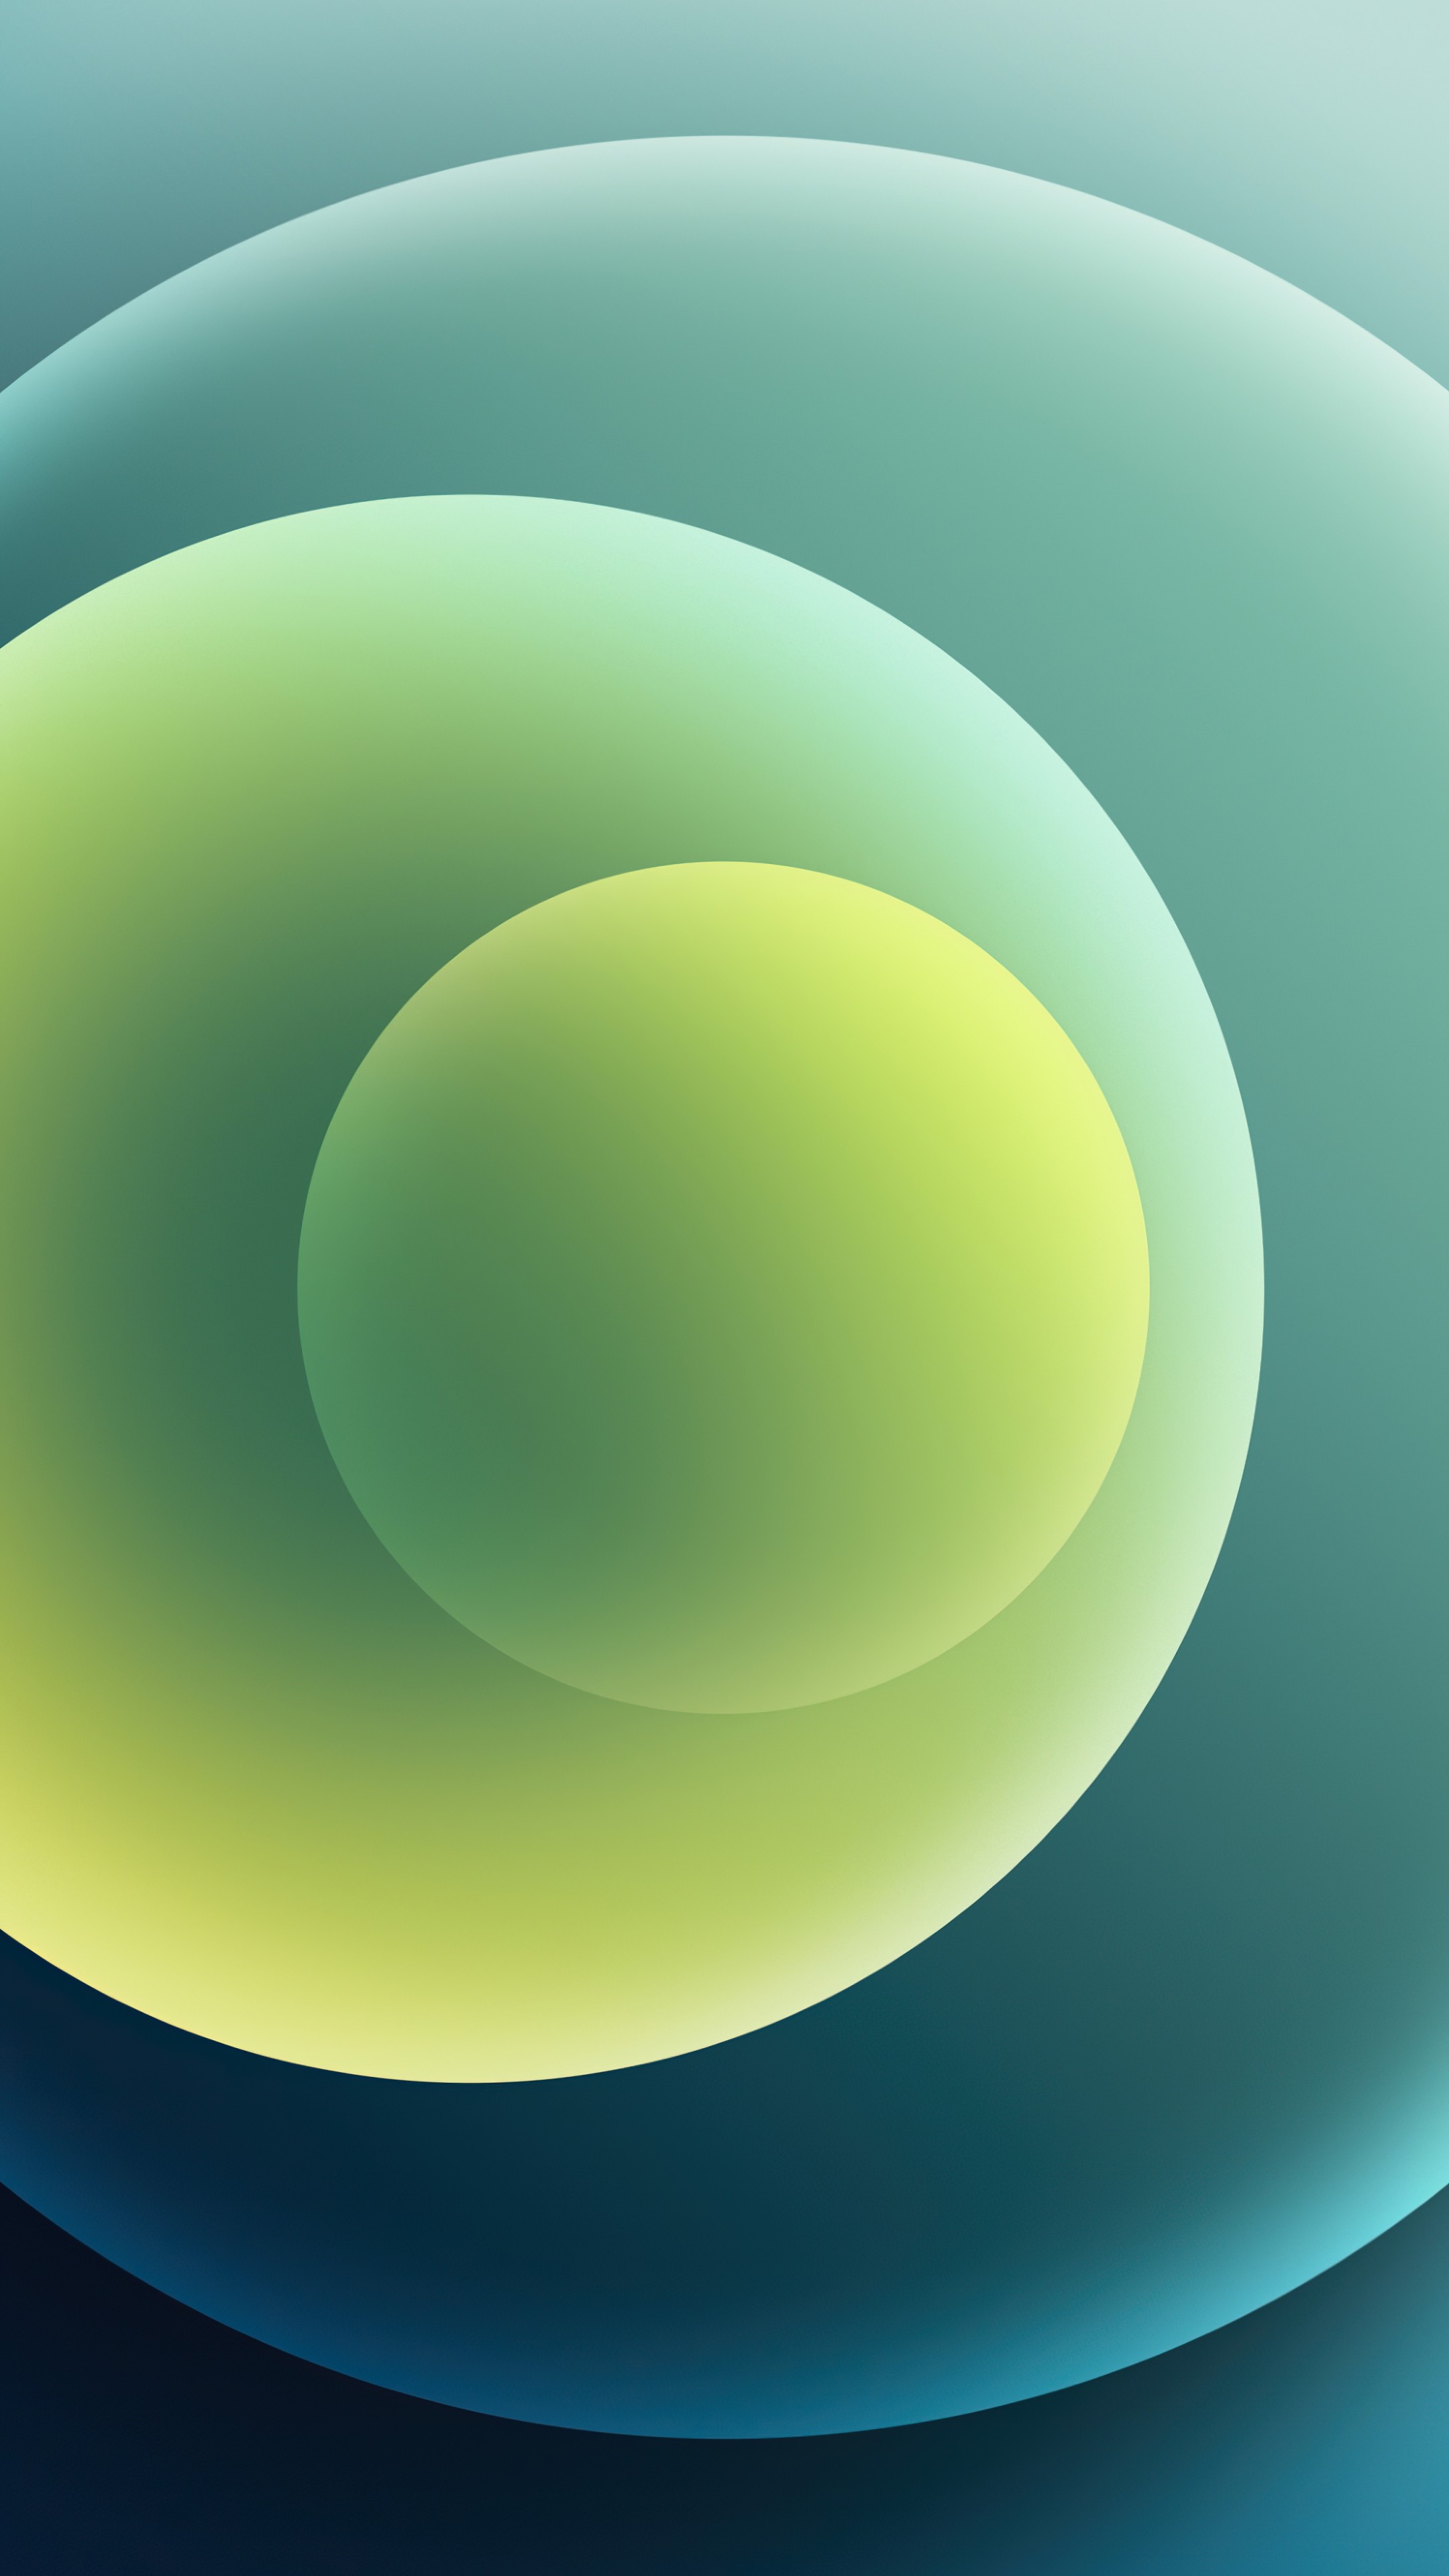 Wallpaper iPhone green, abstract, Apple October 2020 Event, 4K, OS